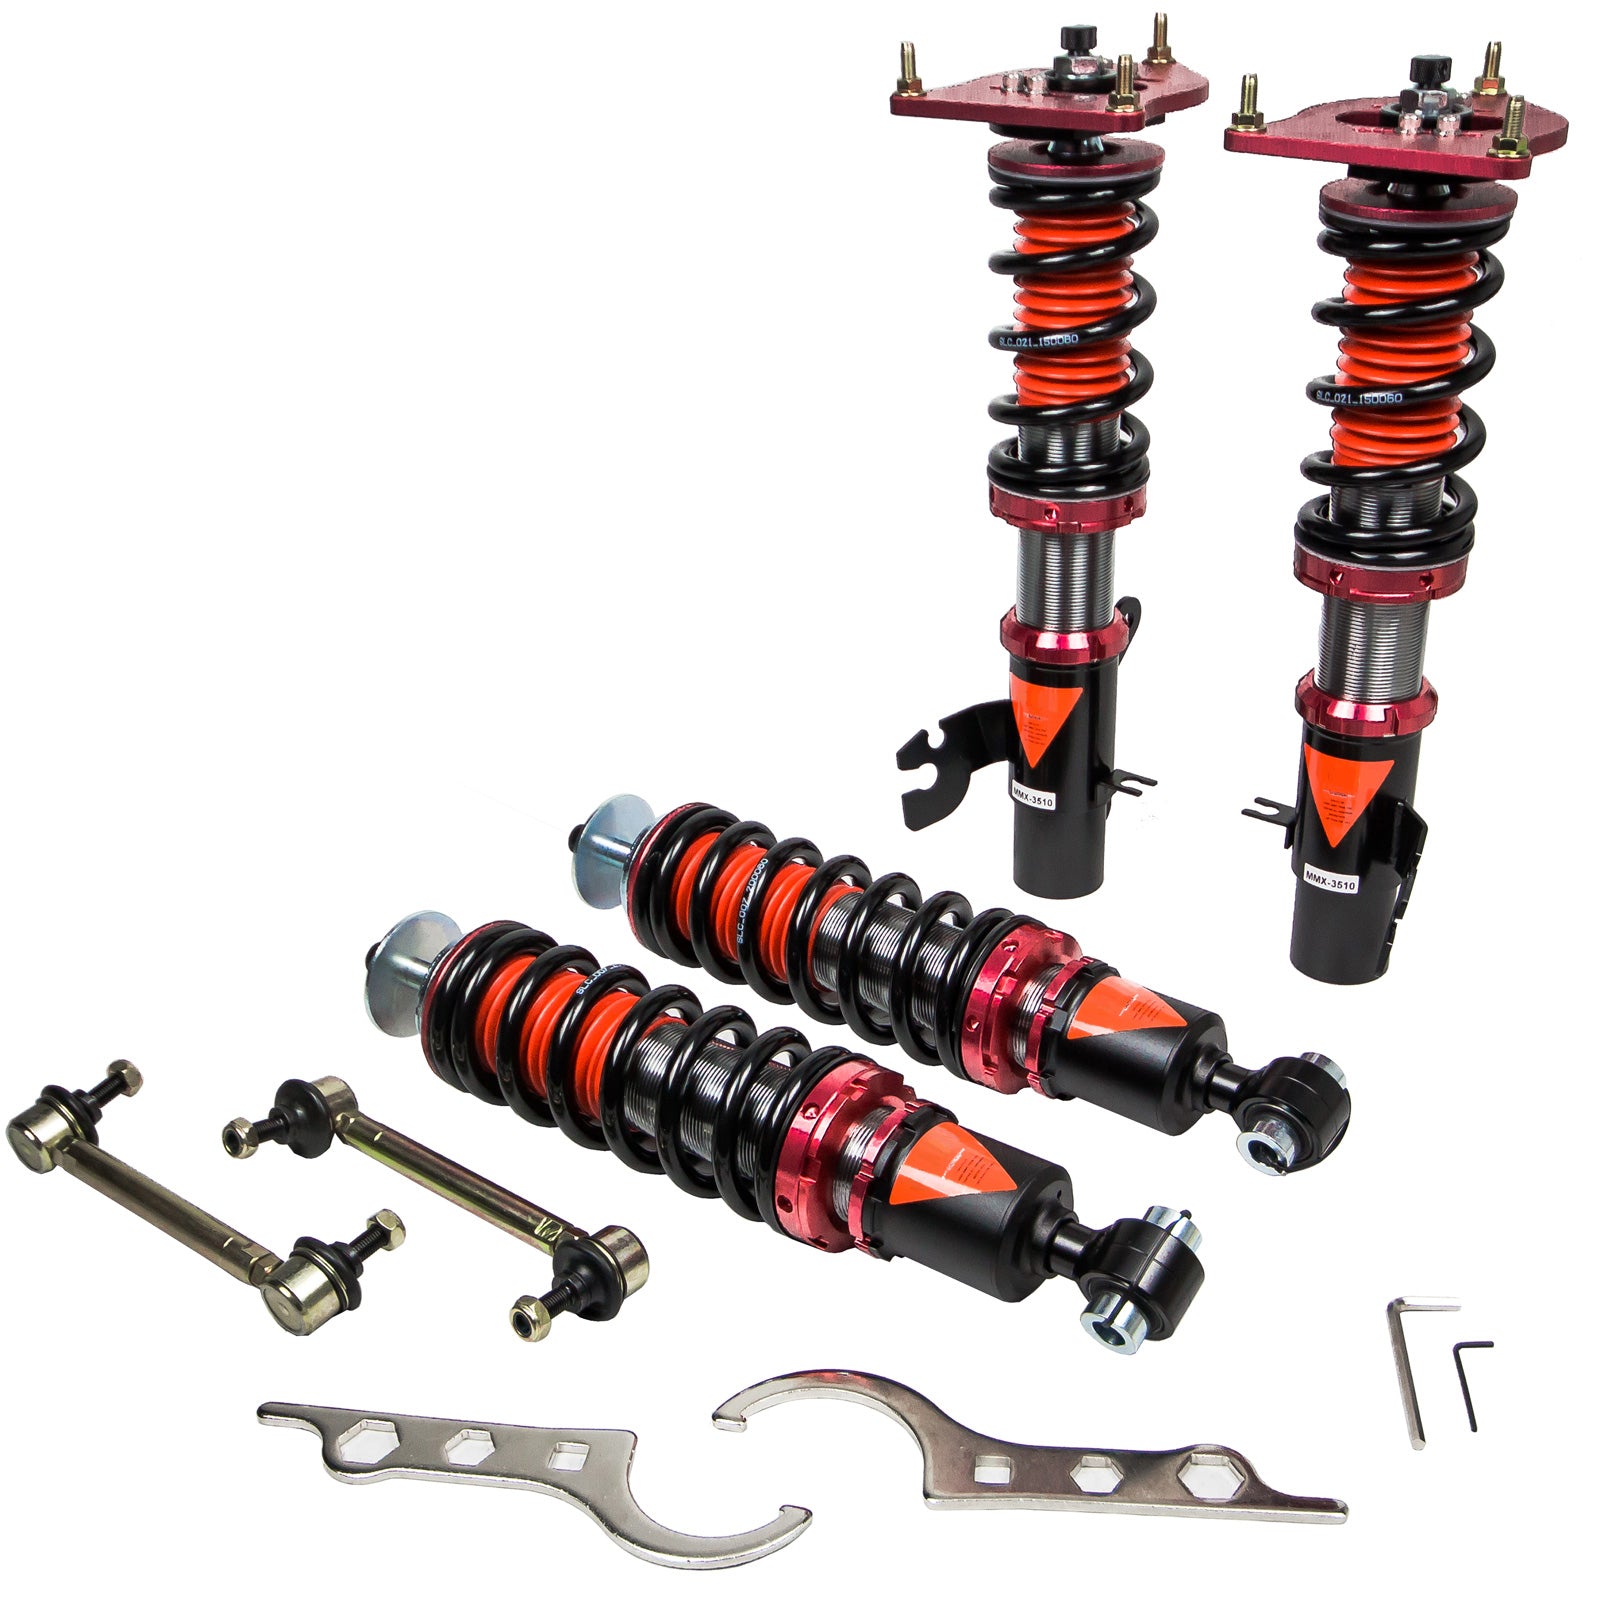 MMX3510-A MAXX Coilovers Lowering Kit, Fully Adjustable, Ride Height, 40 Clicks Rebound Settings, MINI Cooper S(R53) 02-06